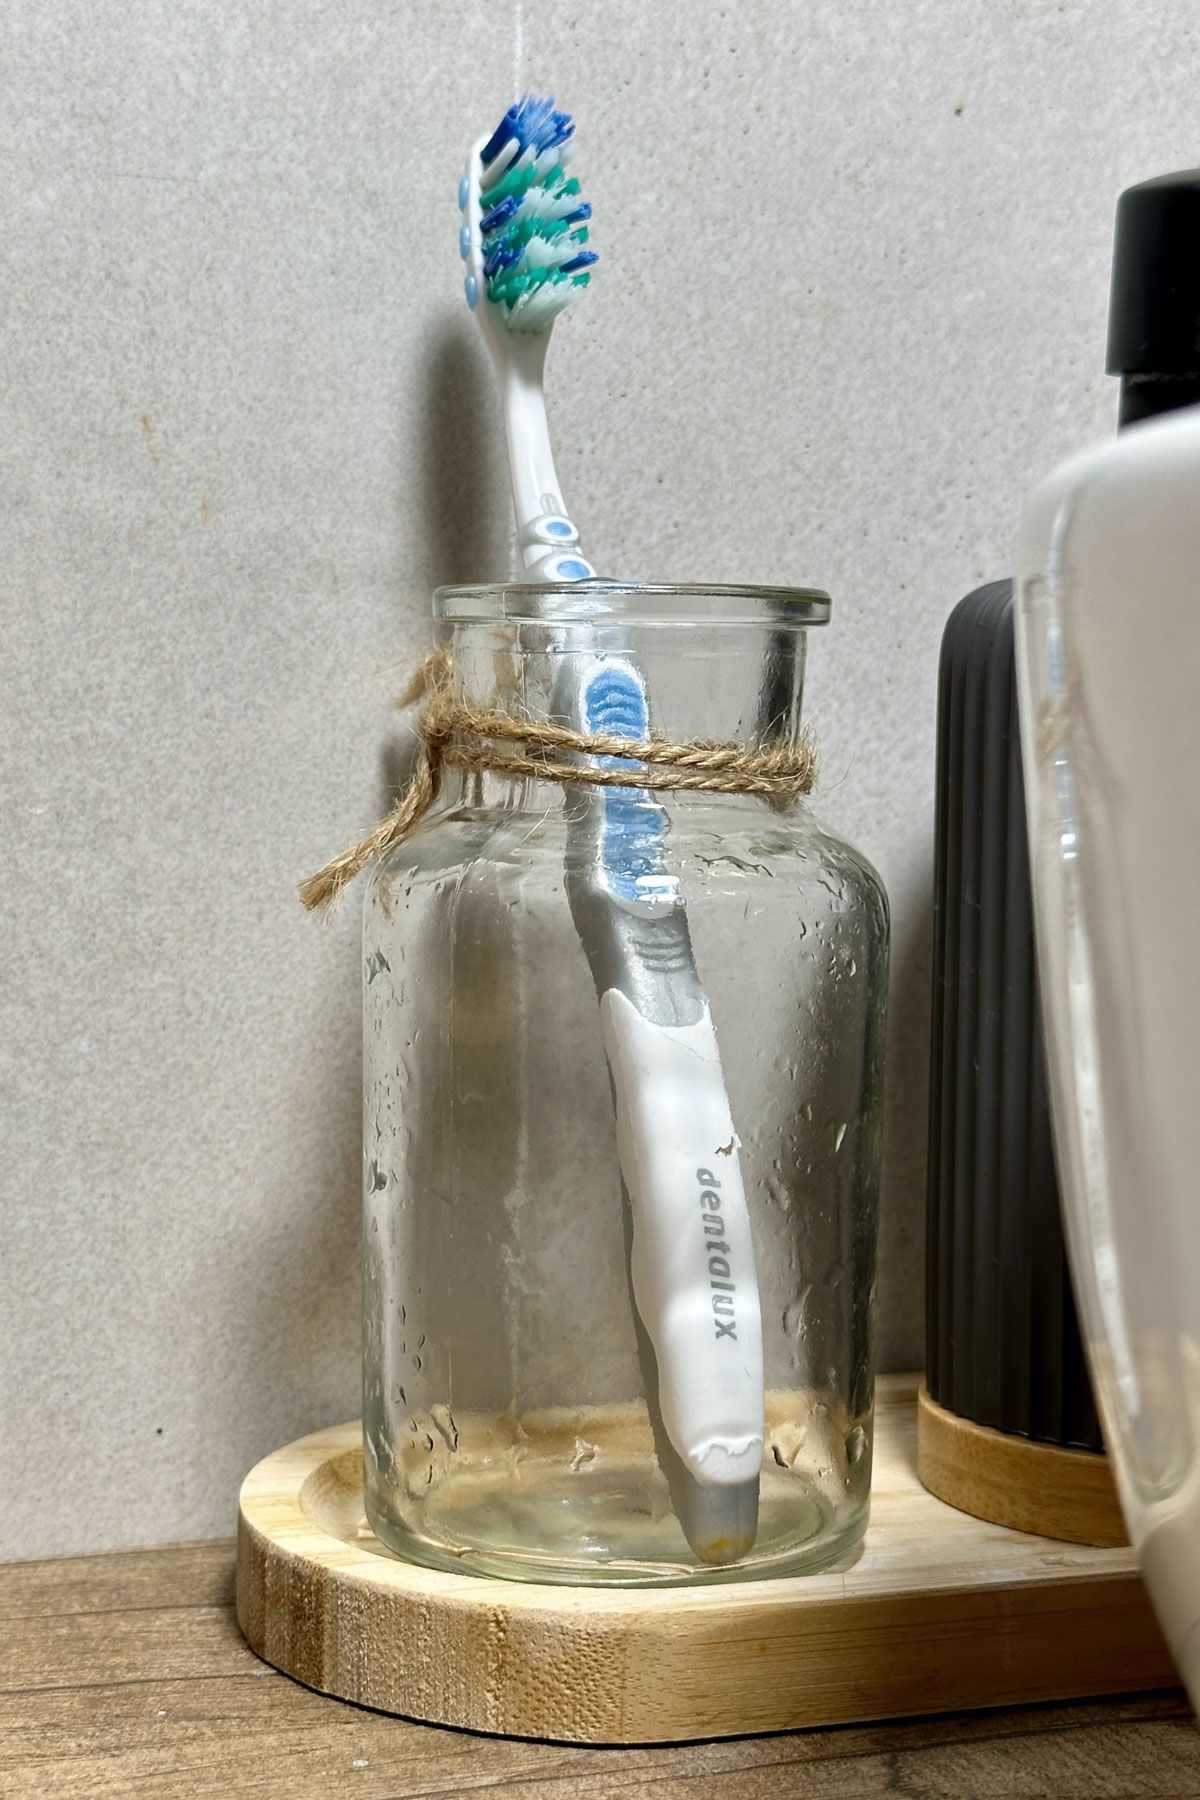  Use A Glass Jar As A Toothbrush Holder